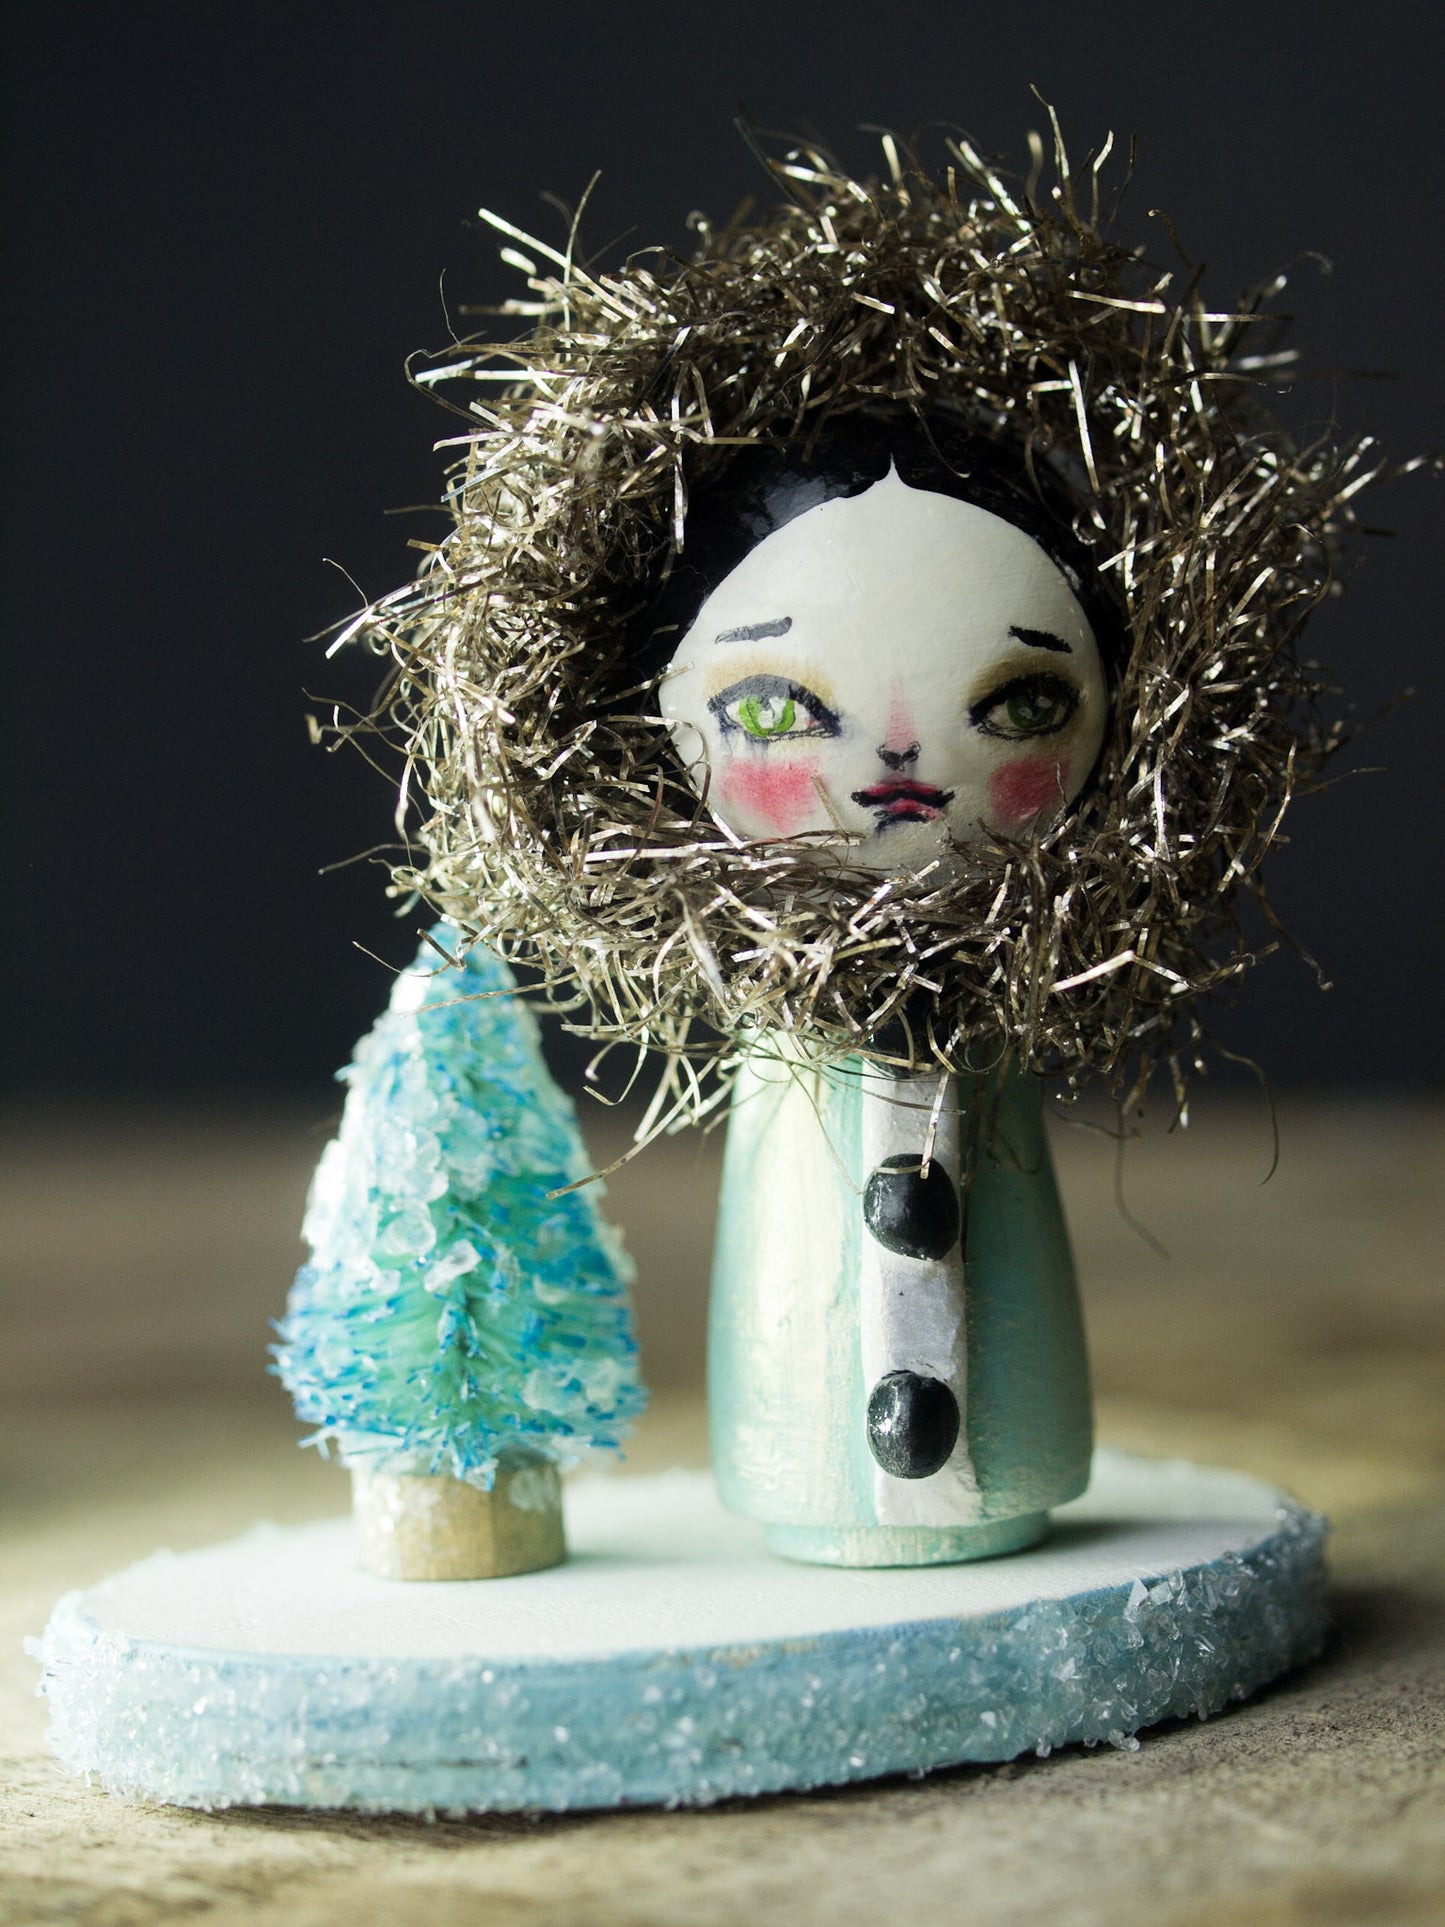 The queen of the North, a holiday wood kokeshi art doll created by Danita Art